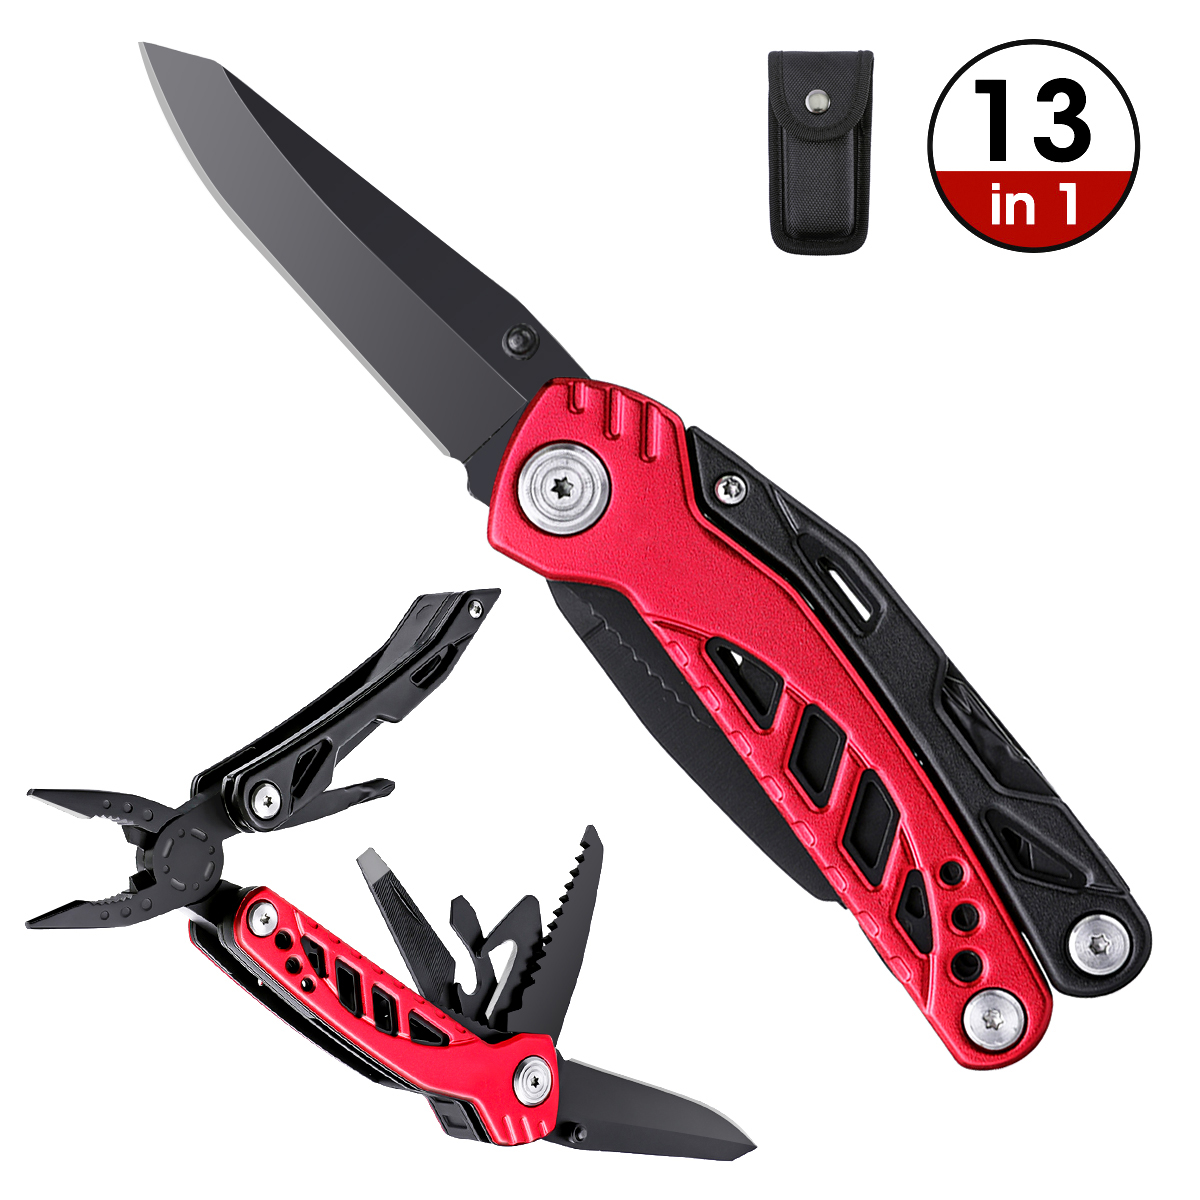 [Xiaomi Youpin] HUOHOU GHK-23A 10 in 1 Multi-function Claw Hammers Pliers Folding Cutter Sawtooth Bottle Opener Screwdriver Scale Saw Home Improvement Tools